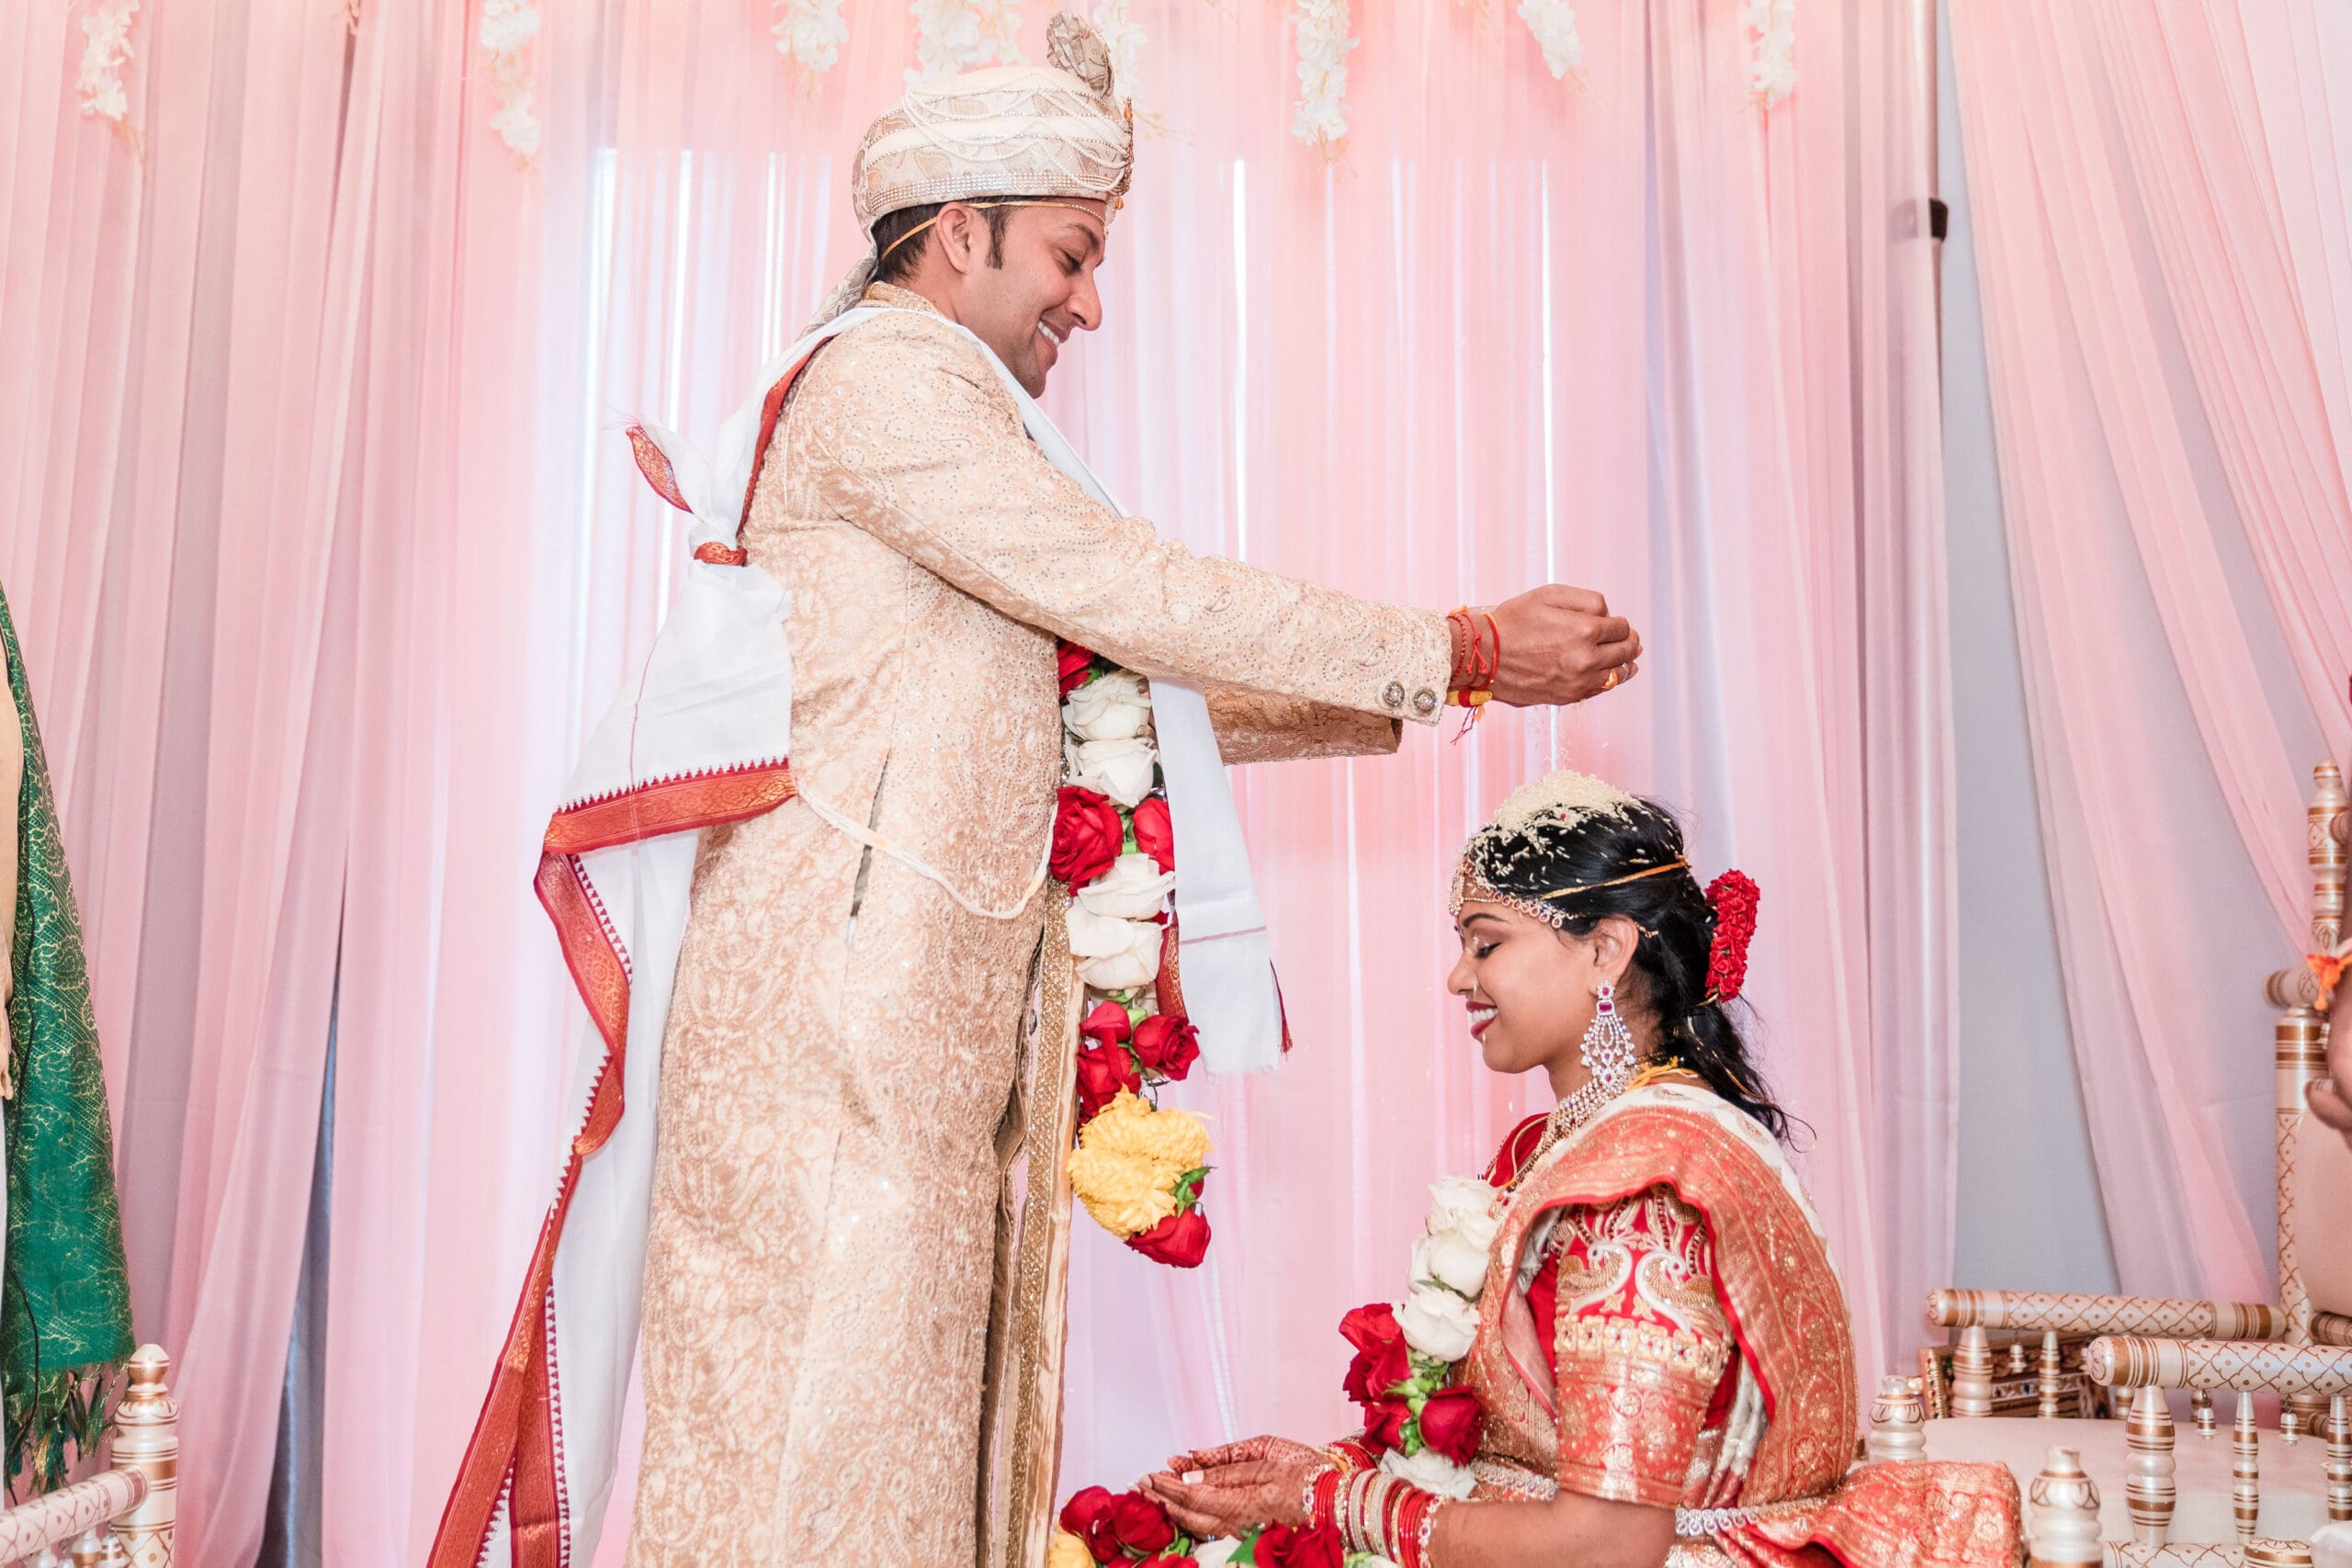 Perfect moment captured in a traditional Indian wedding by Jerzy Nieves Photography